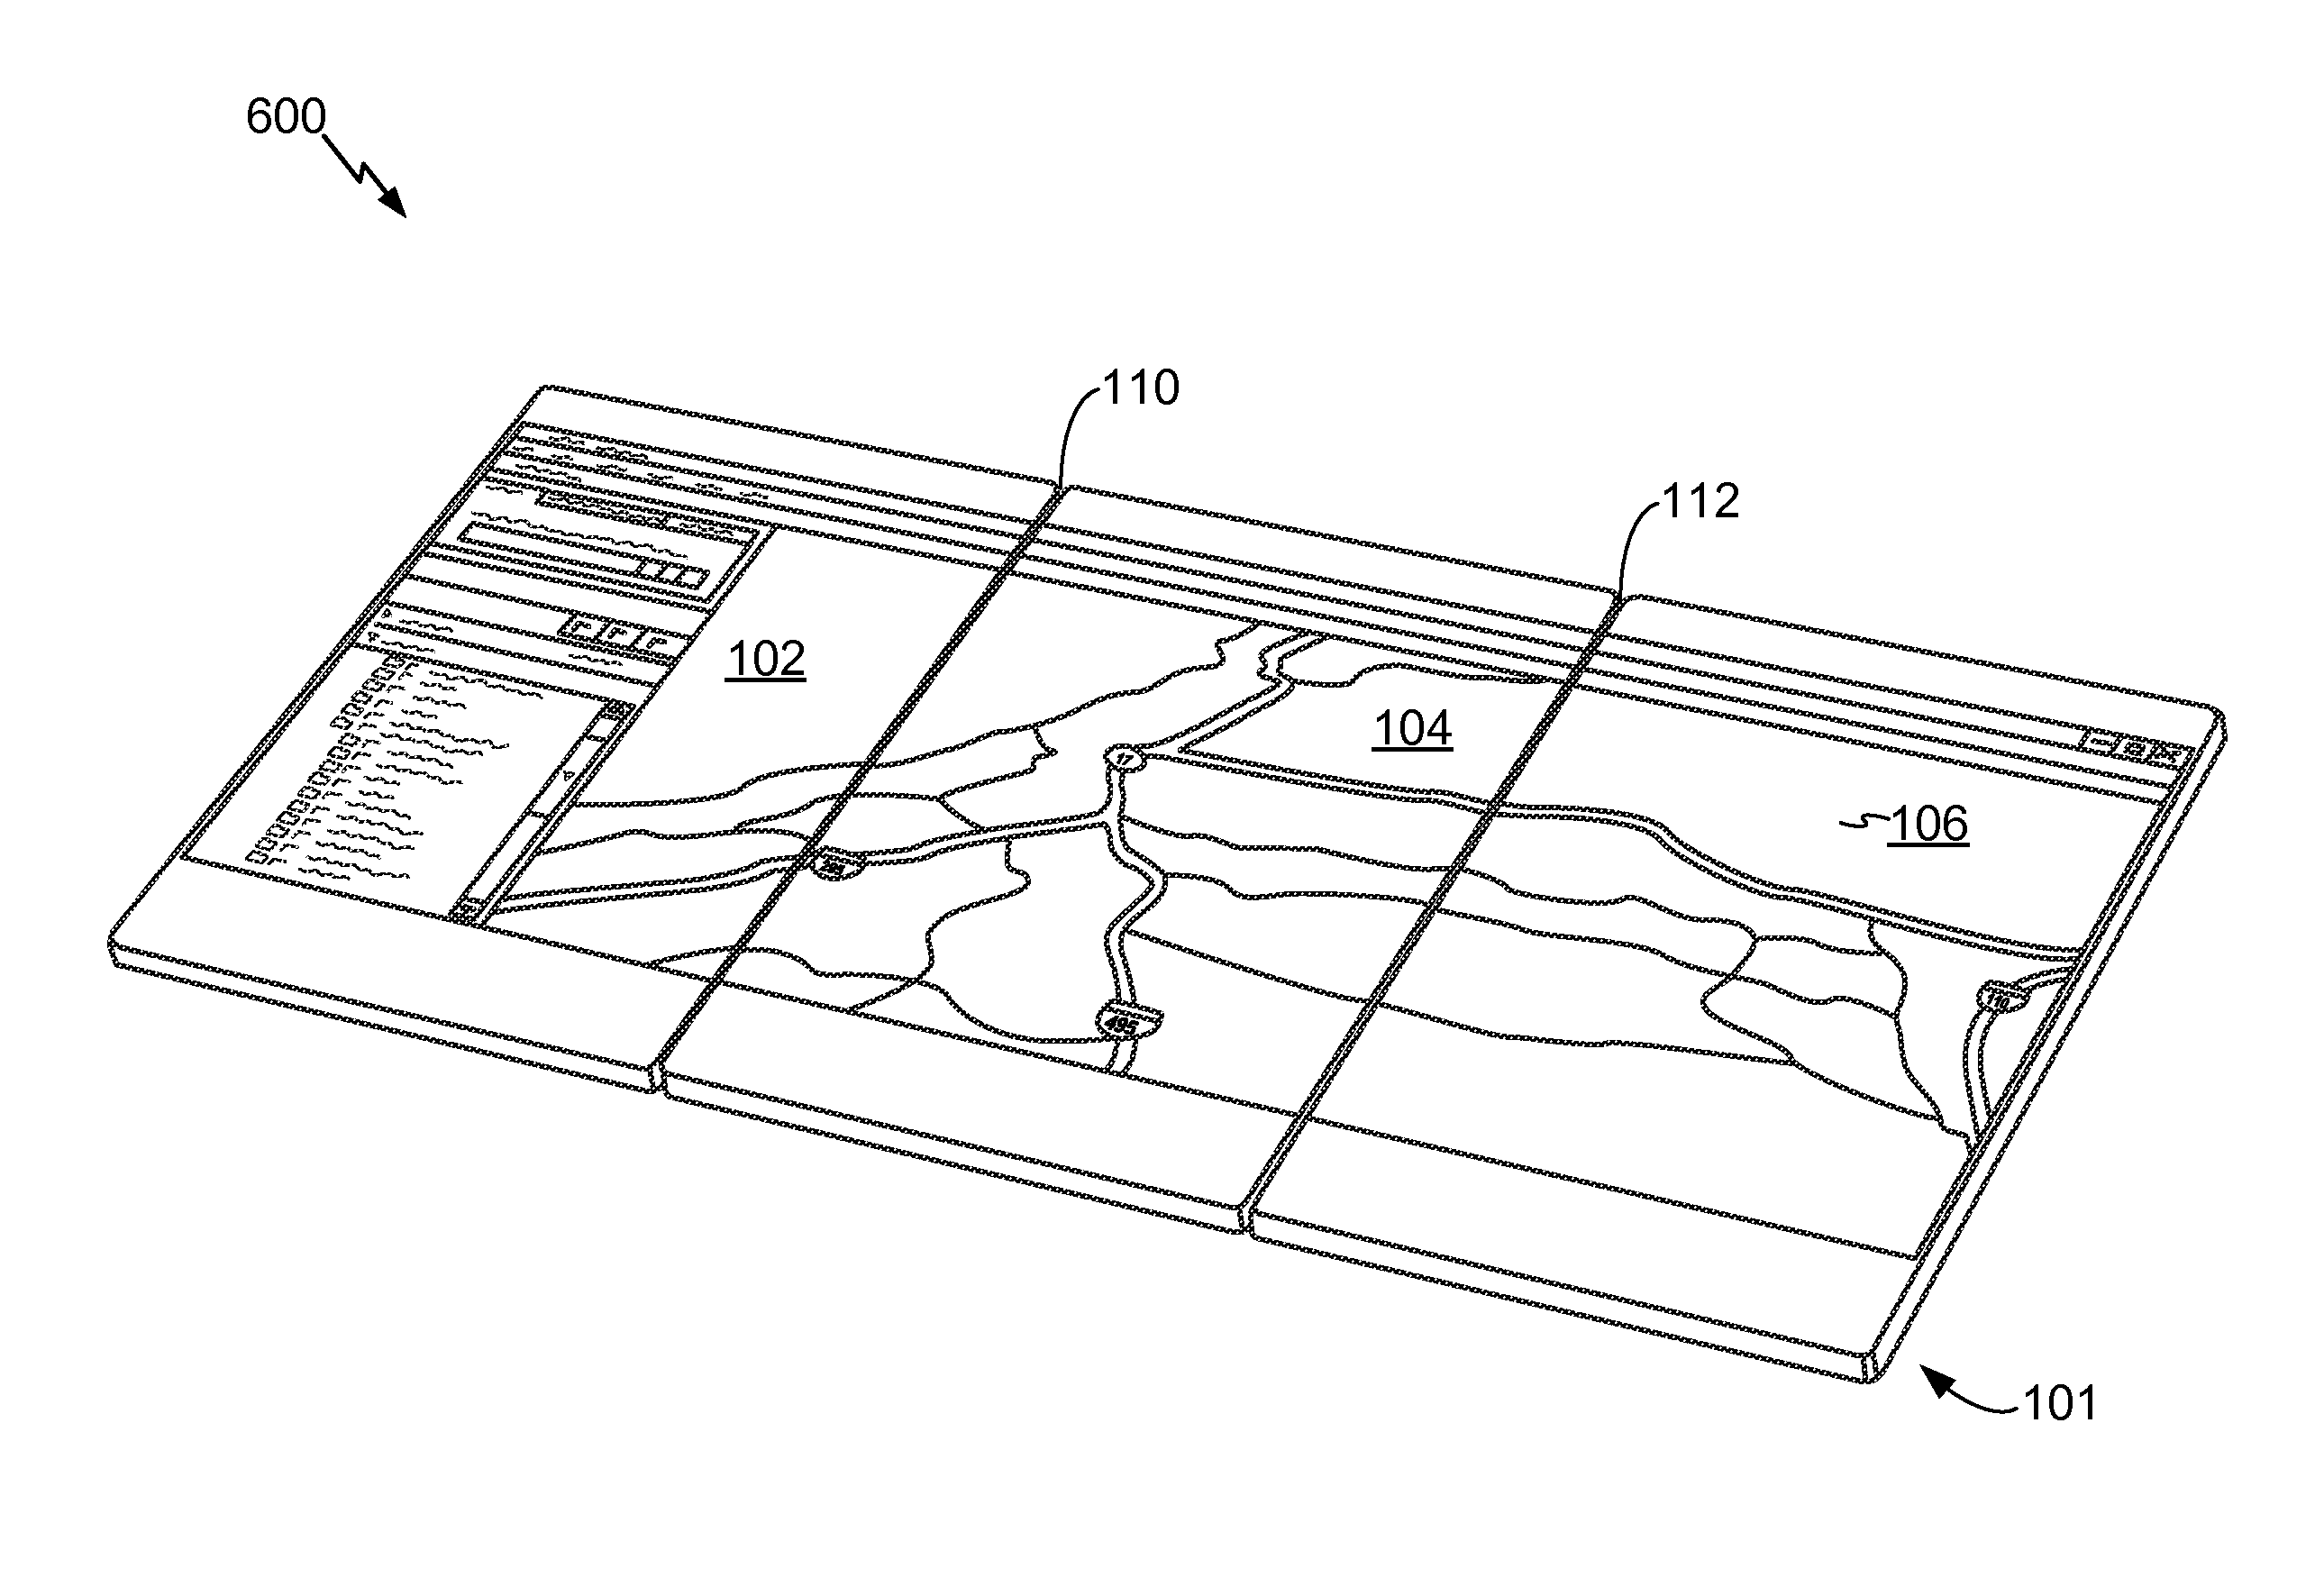 Multi-fold mobile device with configurable interface